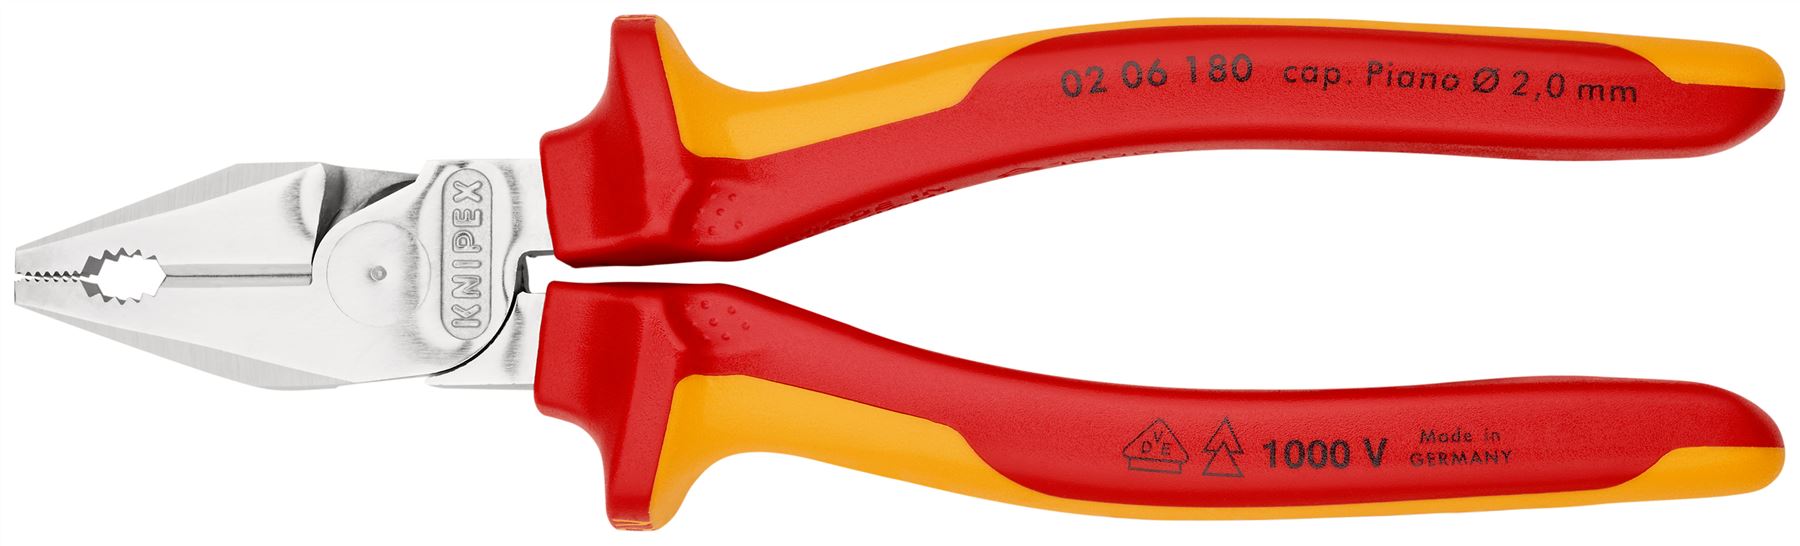 KNIPEX Combination Pliers High Leverage 180mm VDE Multi Component Grips 02 06 180 SB